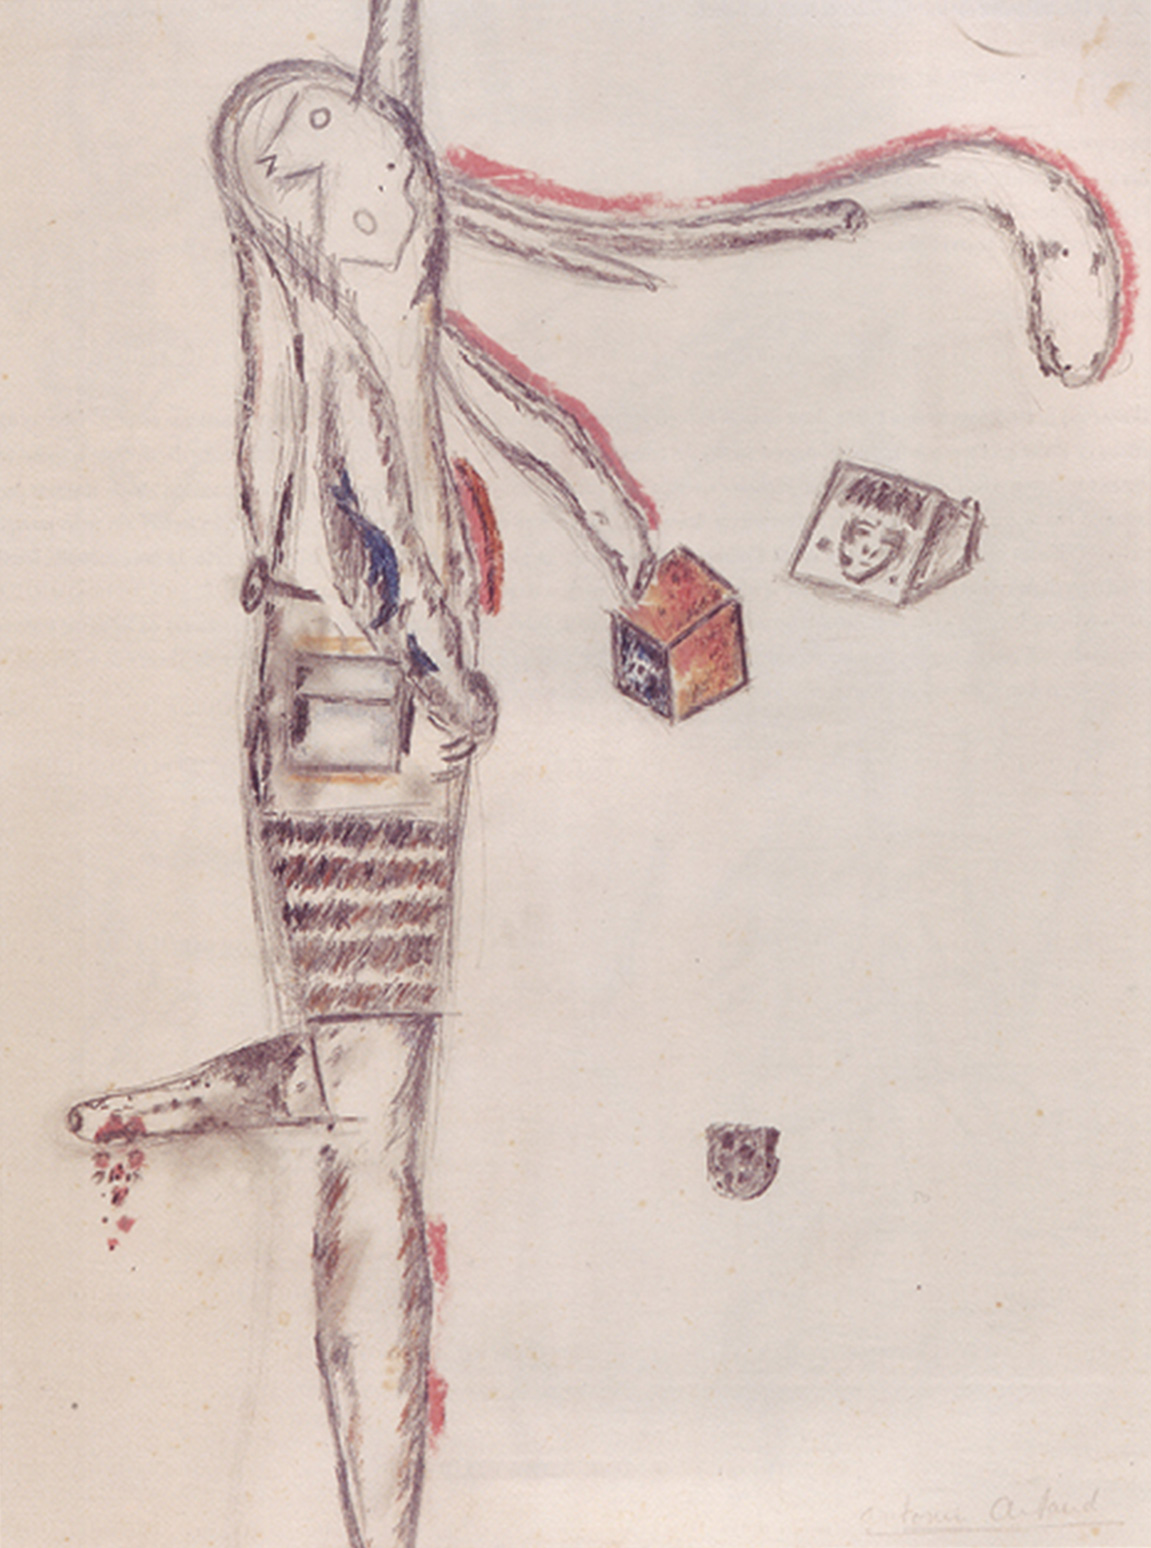 A drawing by Antonin Artaud titled “Le totem,” December nineteen forty five.